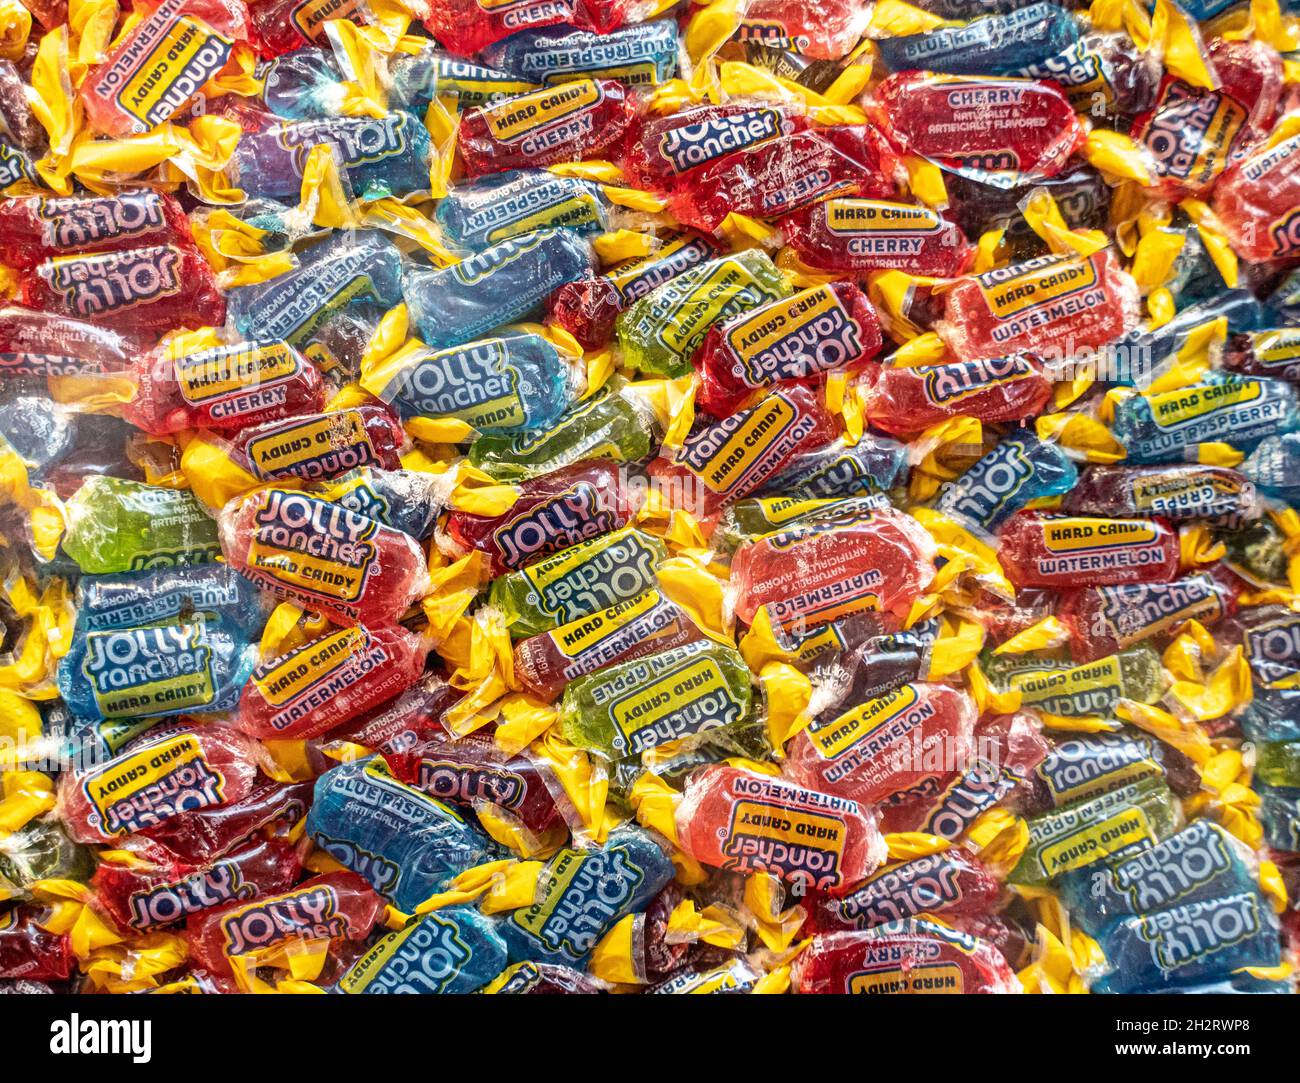 Hershey, Pennsylvania – October 15, 2021: Colorful Jolly Rancher Hard Candy on display at Hershey Chocolate World retail store Stock Photo